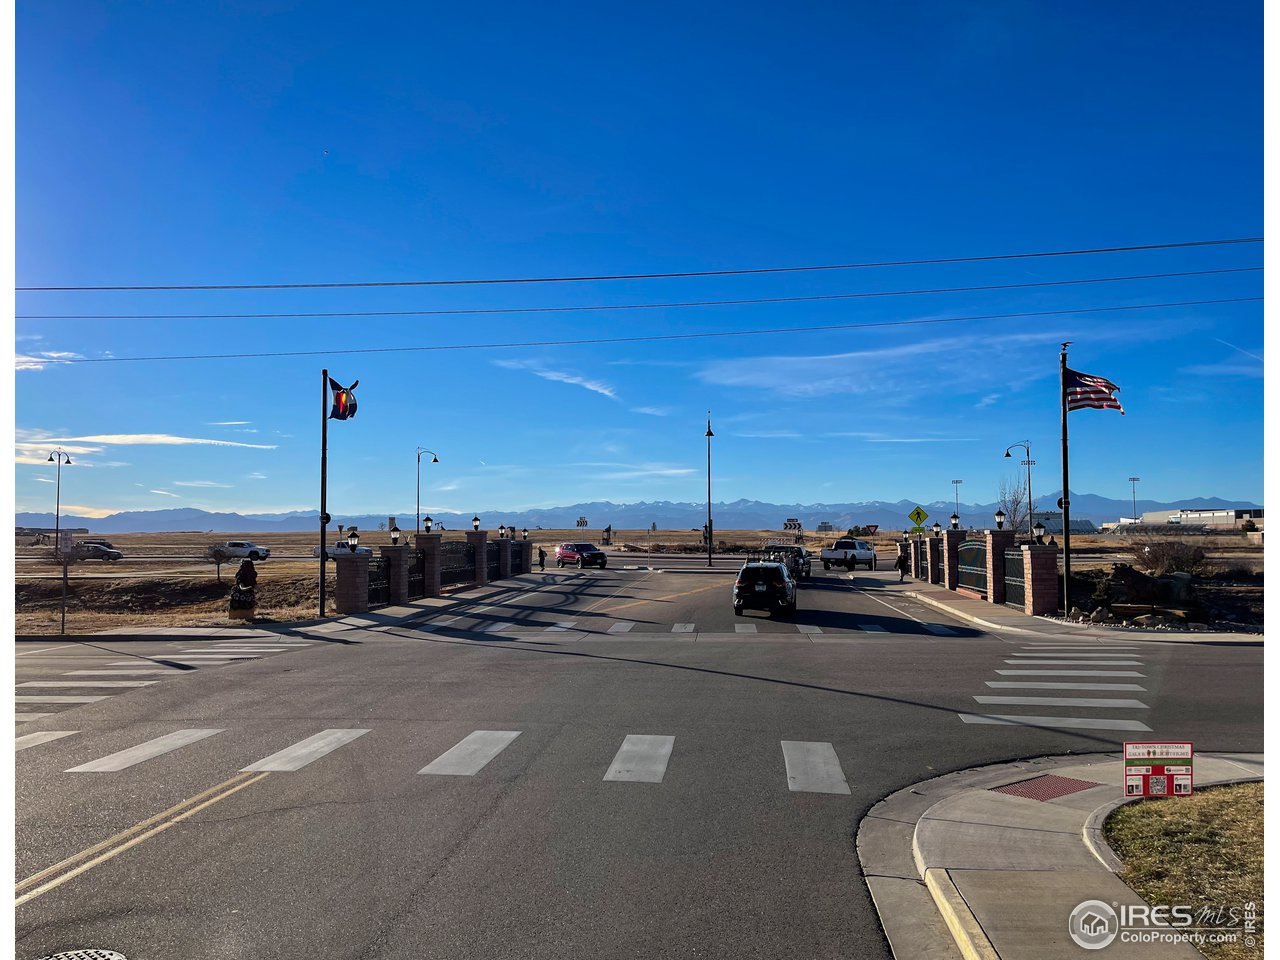 5th and Colorado Boulevard has a traffic circle that is steps from 234 5th St.